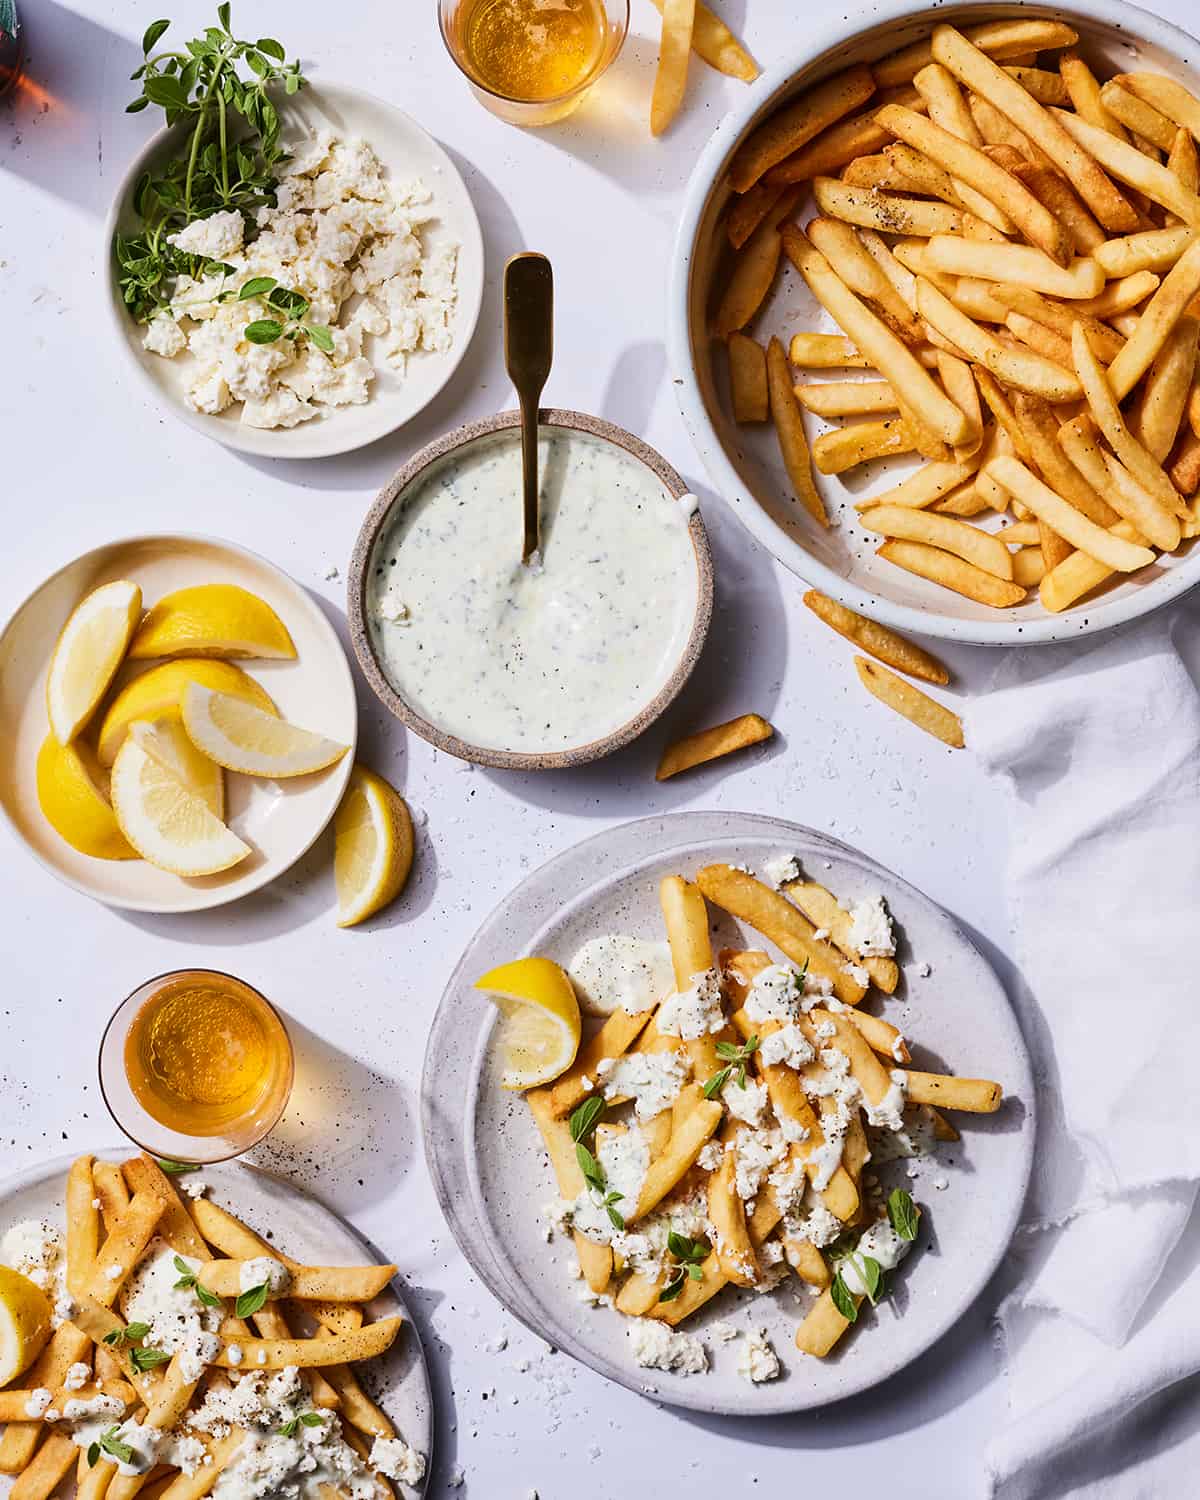 A bowl of homemade fries next to a bowl of feta dipping sauce, a bowl of feta, and a bowl of lemon wedges.  